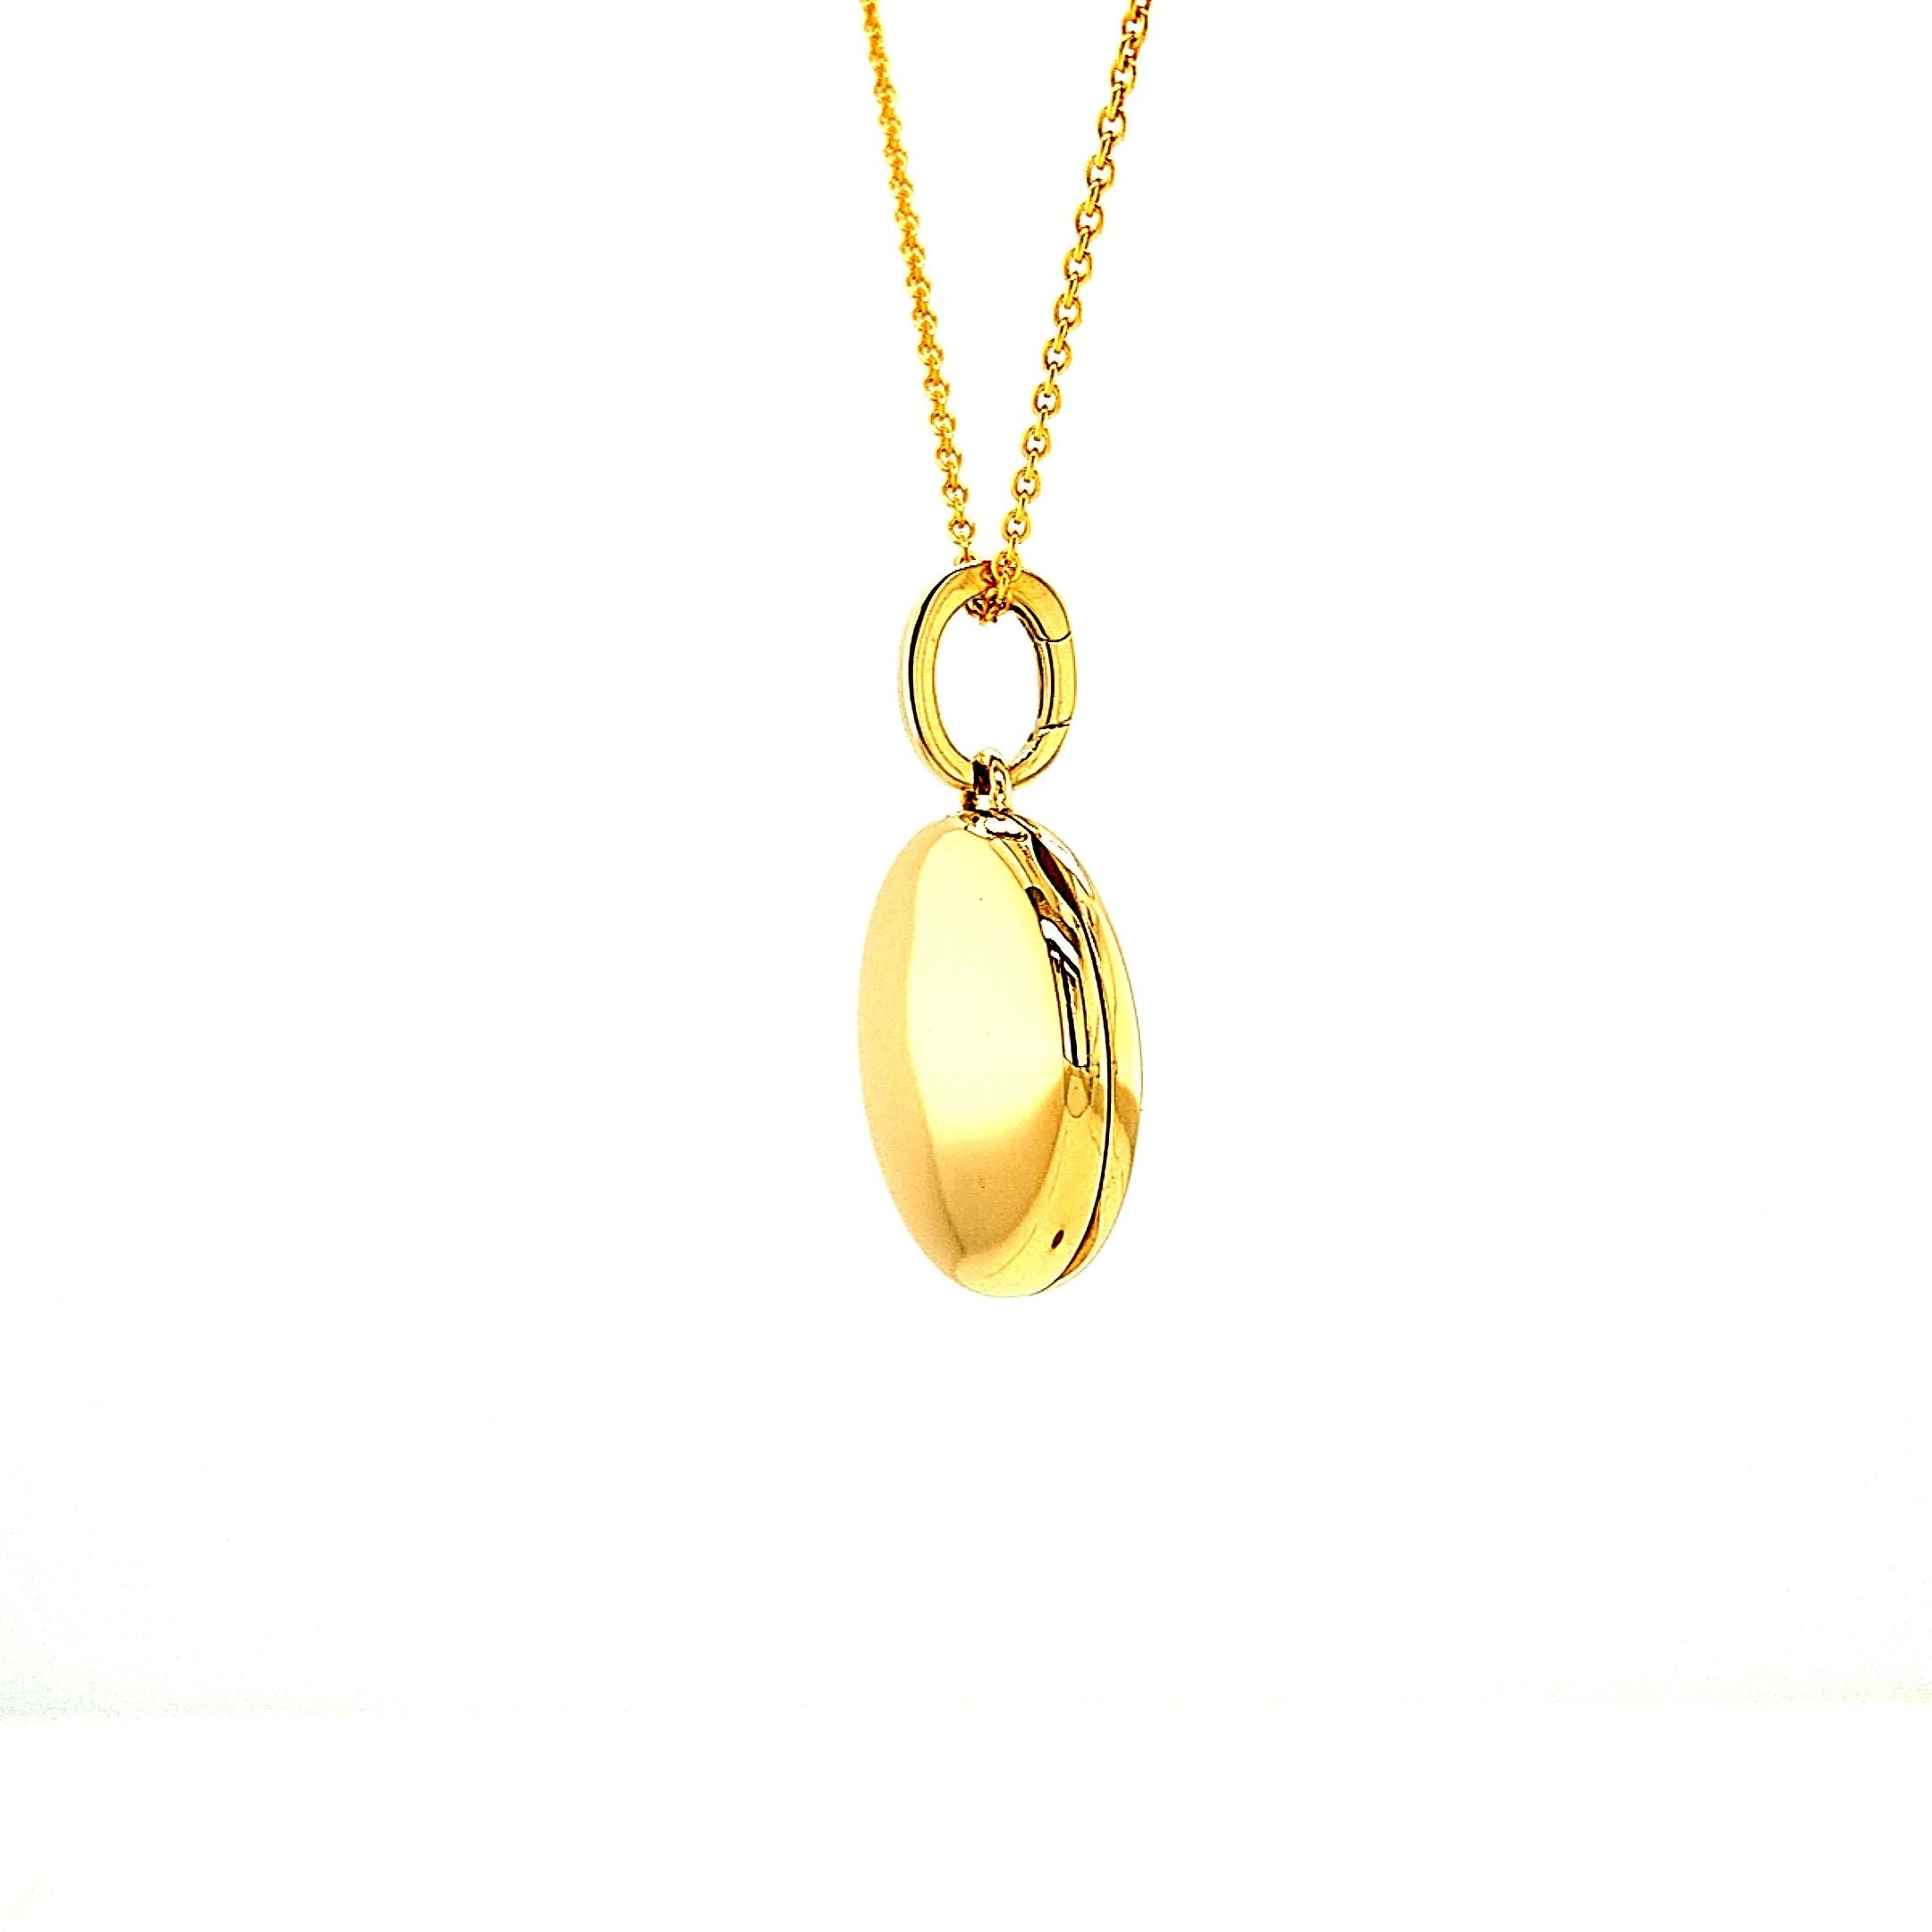 Victor Mayer customizable round polished pendant locket 18k yellow gold, Hallmark Collection, diameter app. 21.0 mm

About the creator Victor Mayer
Victor Mayer is internationally renowned for elegant timeless designs and unrivalled expertise in